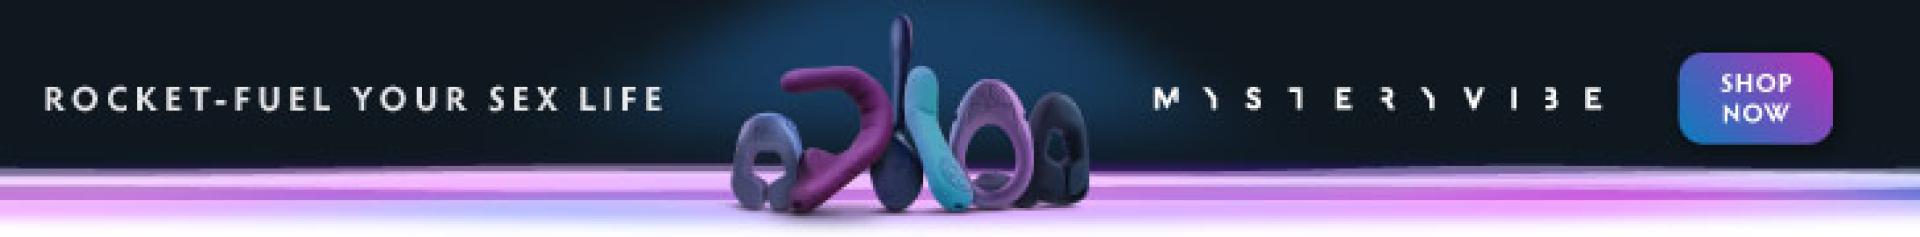 MysteryVibe couples sex toys advertisement banner